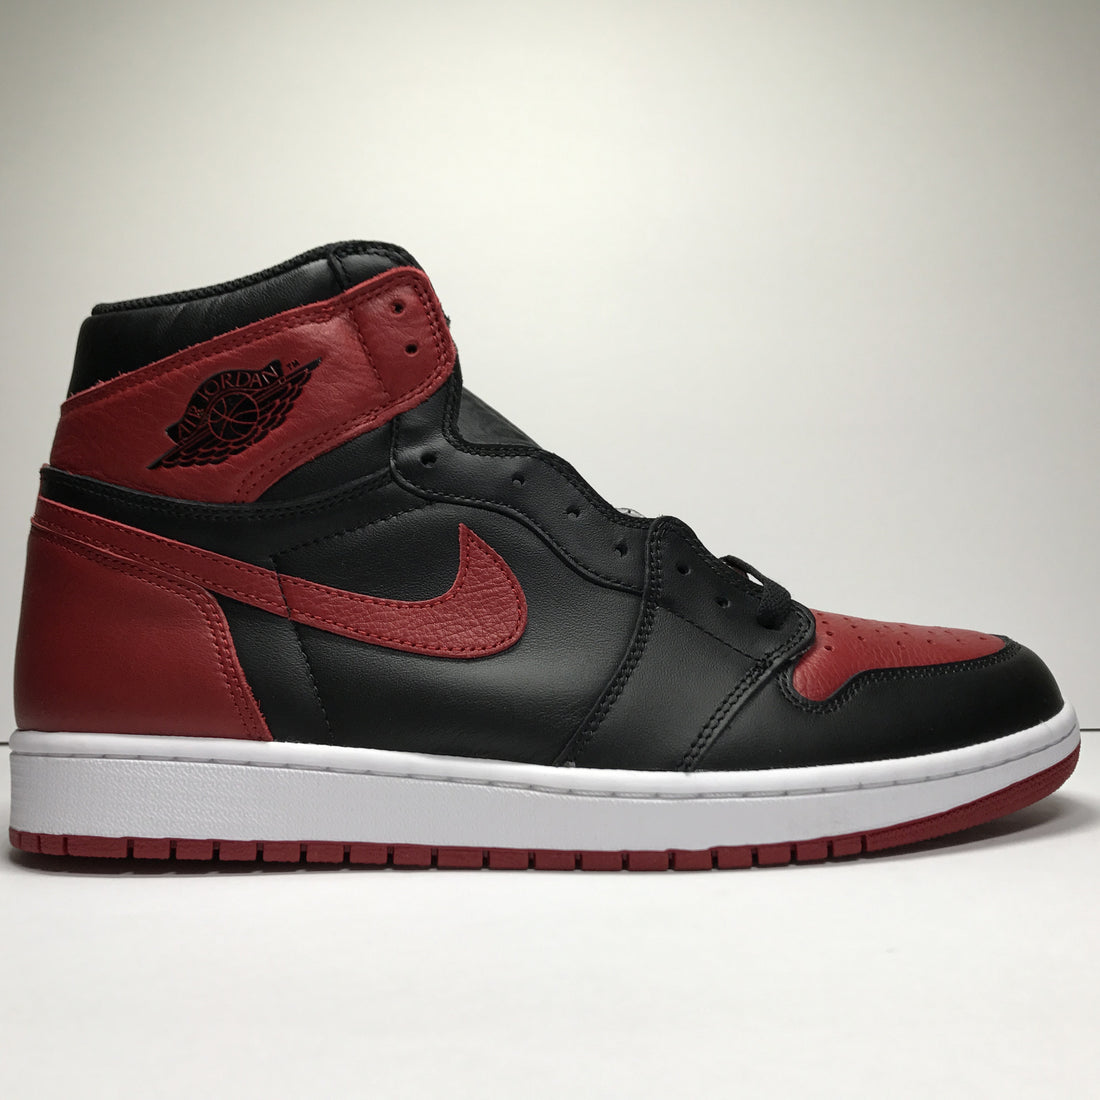 Jordan 1 Banned Bred 2016 Real vs Fake Guide - Photos, Videos, and Notes